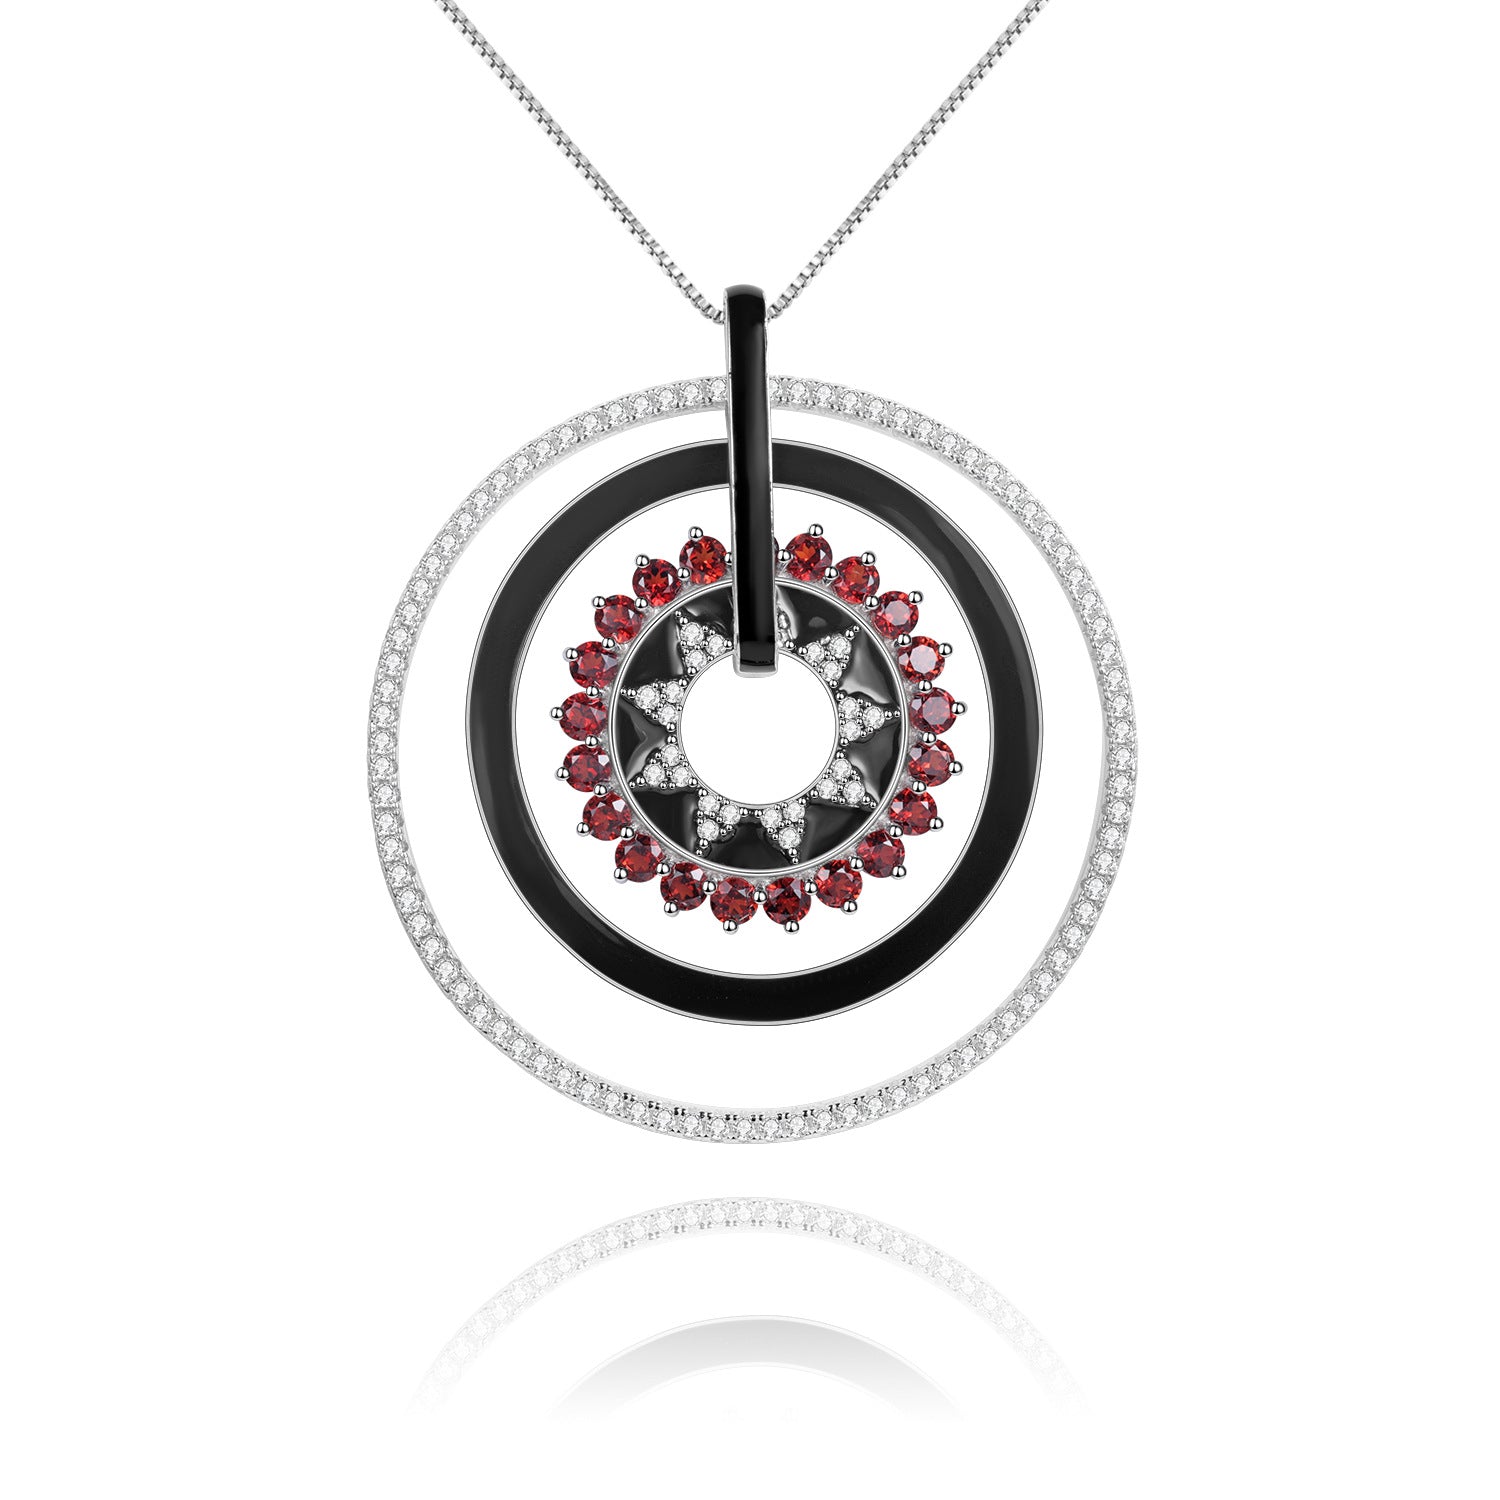 Natural Colourful Gemstones Enamel Circle Pendant Silver Necklace for Women